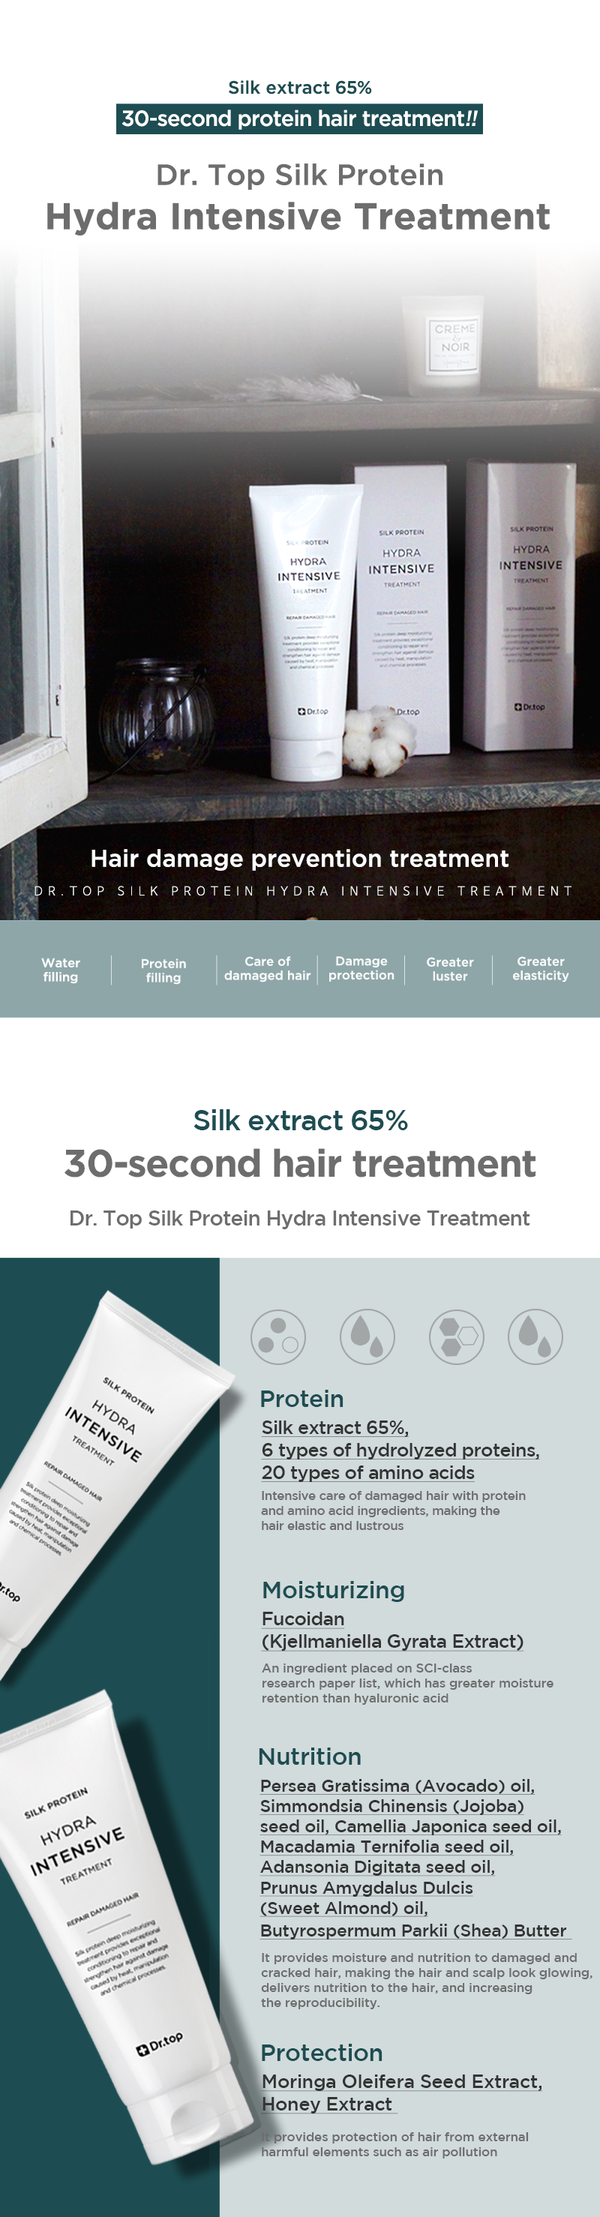 DR. TOP SILK PROTEIN HYDRA INTENSIVE TREATMENT